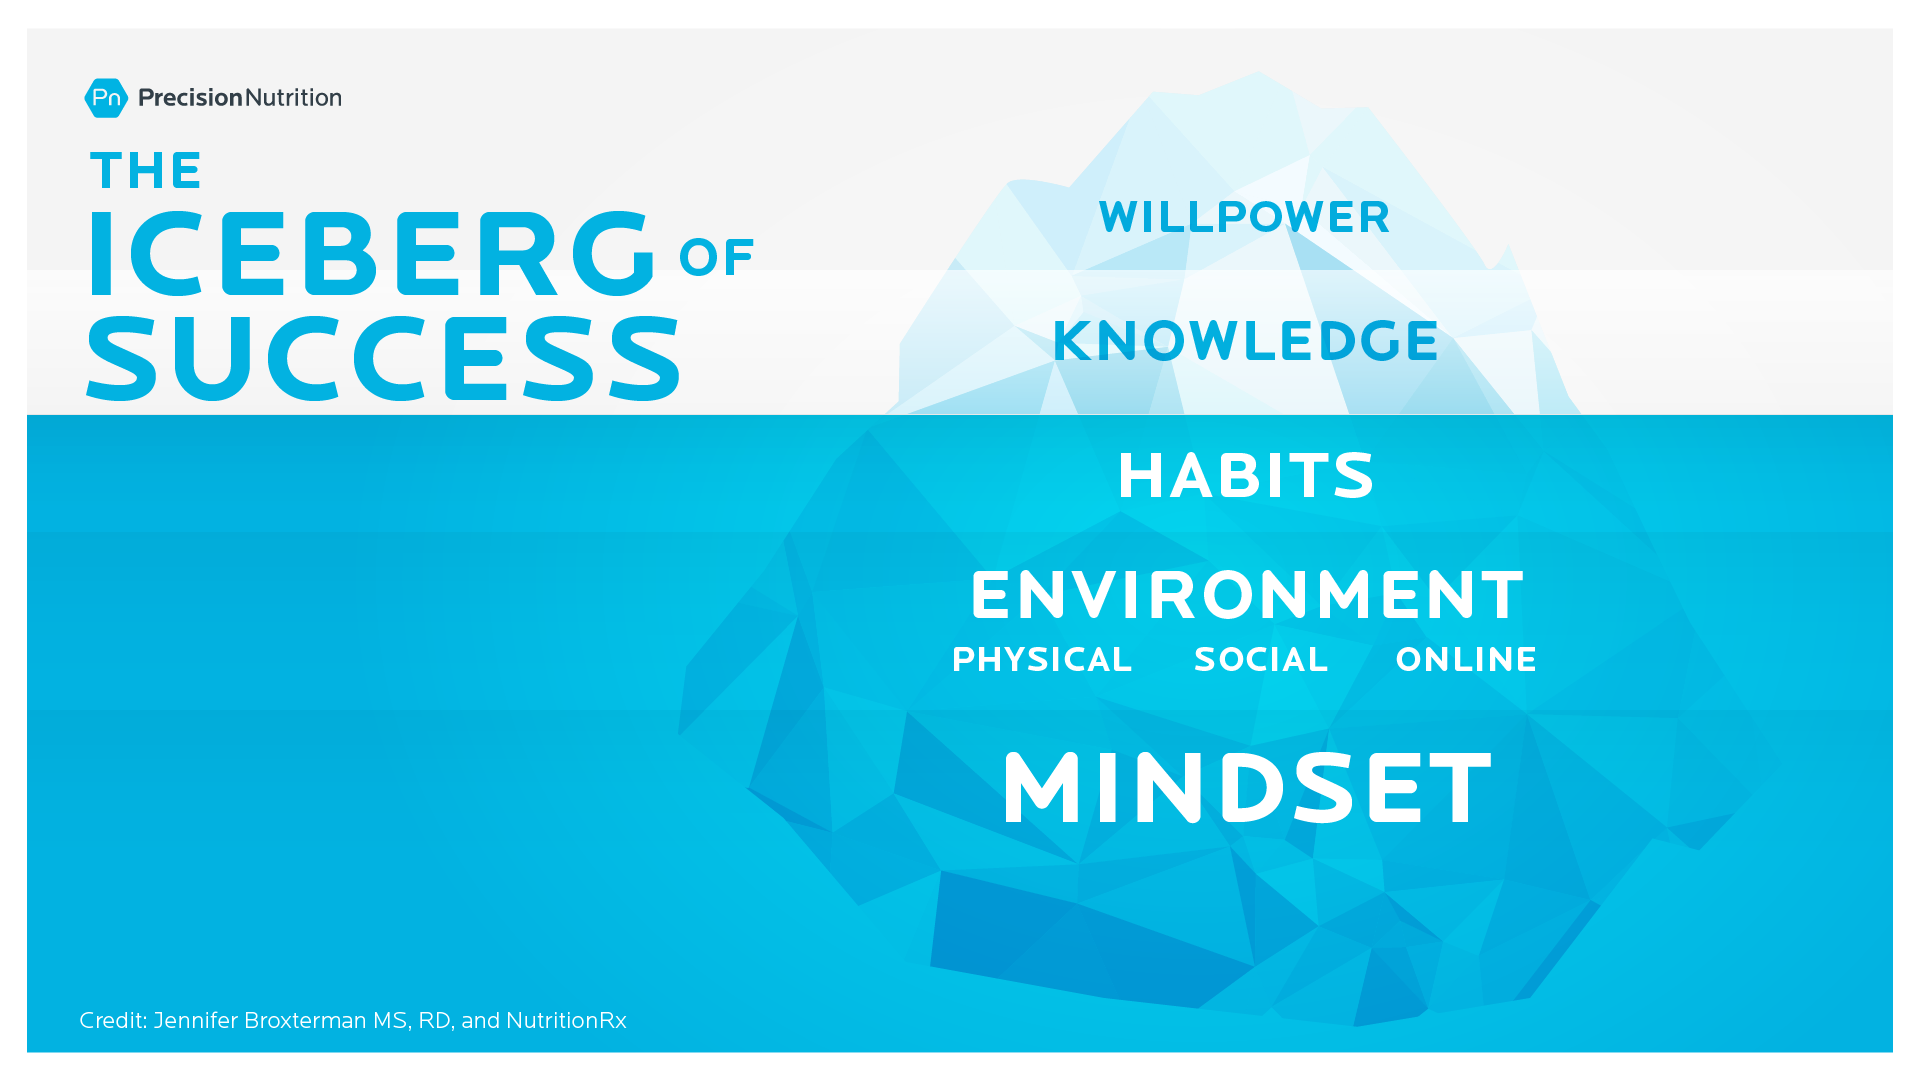 An illustration of the iceberg of success. Mindset, environment, habits are below the water and knowledge and willpower are above the water.